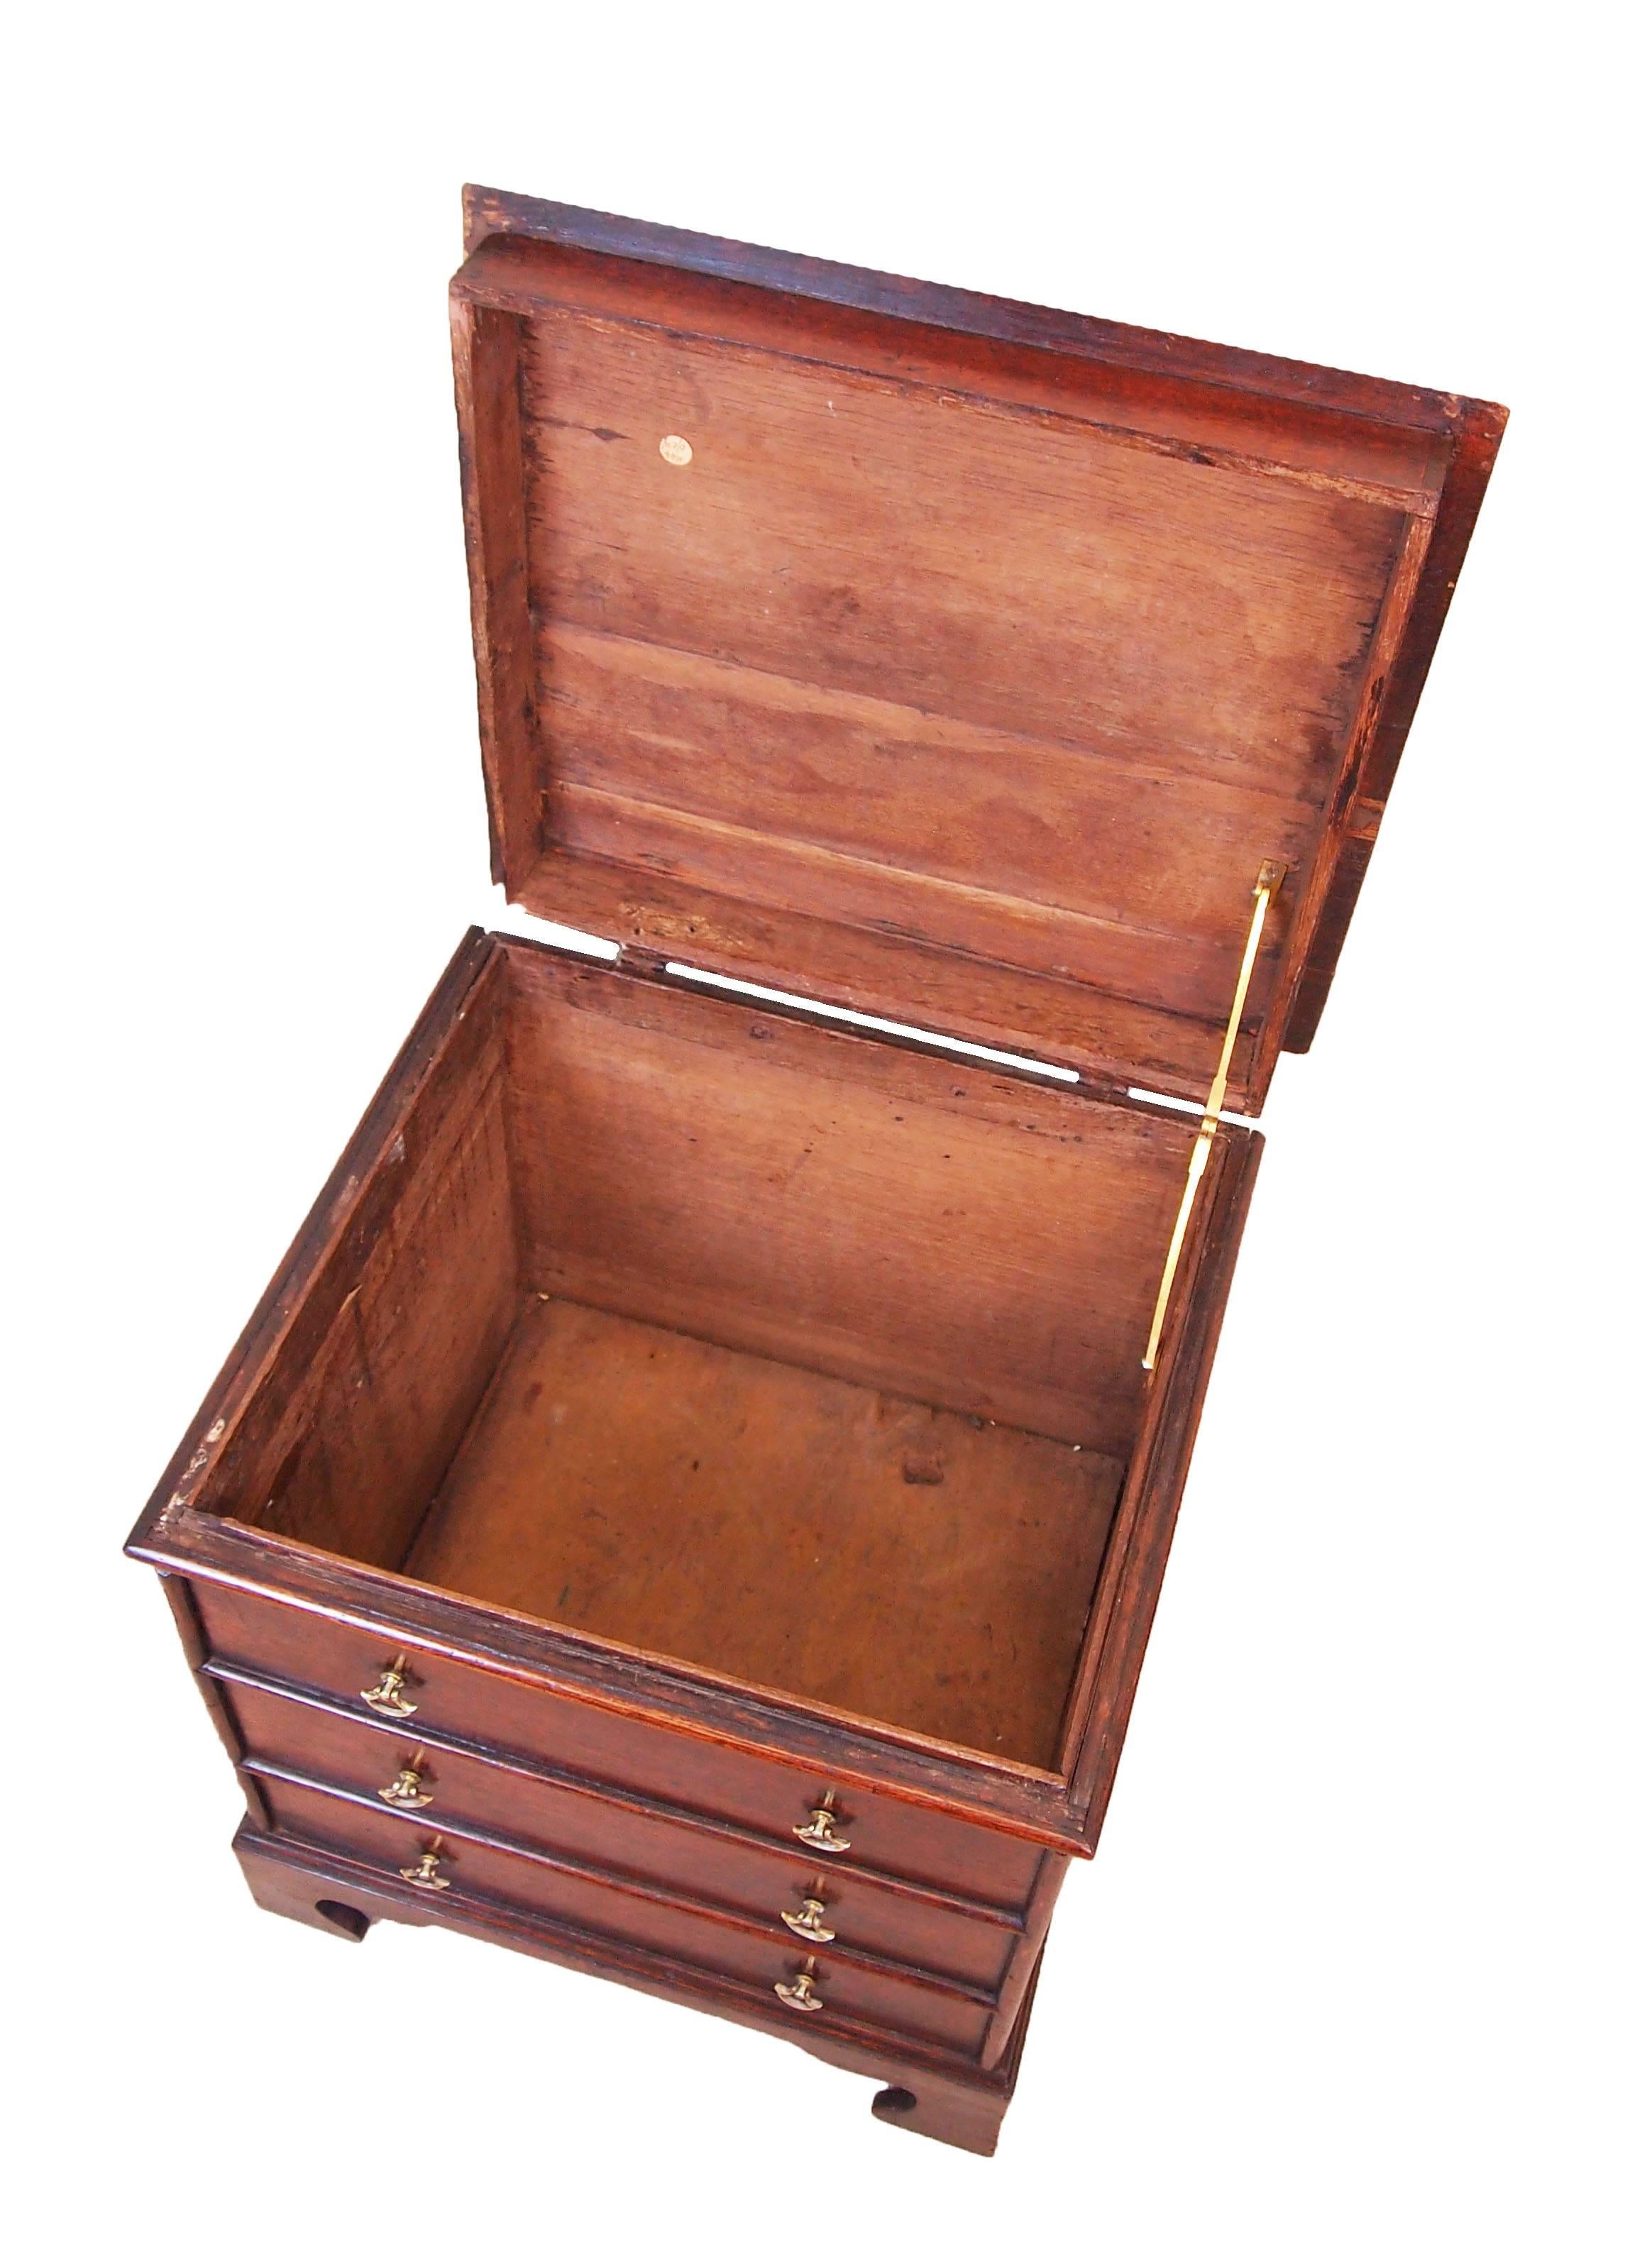 An attractive 18th century Georgian oak converted box commode
Of good color and patina having lift up lid above three false
Drawers flanked by original brass carrying handles raised on
Original bracket feet

(Dating from the mid-18th century